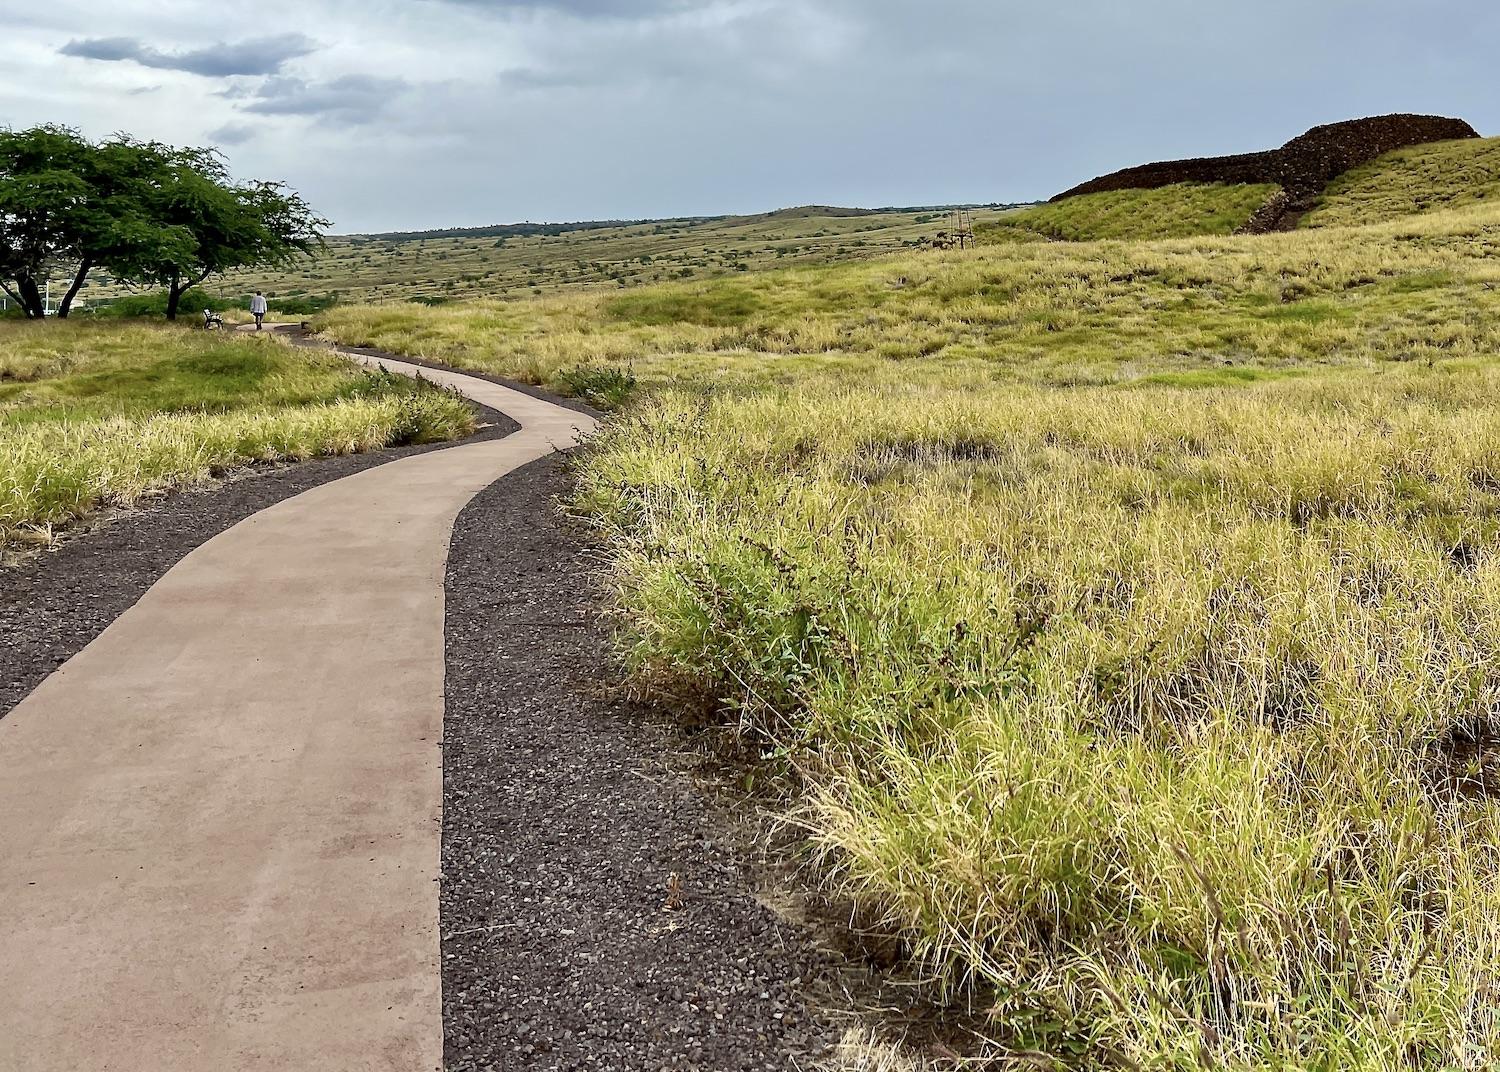 The short path from the visitor center to the heiau (temple) is ADA-accessible.